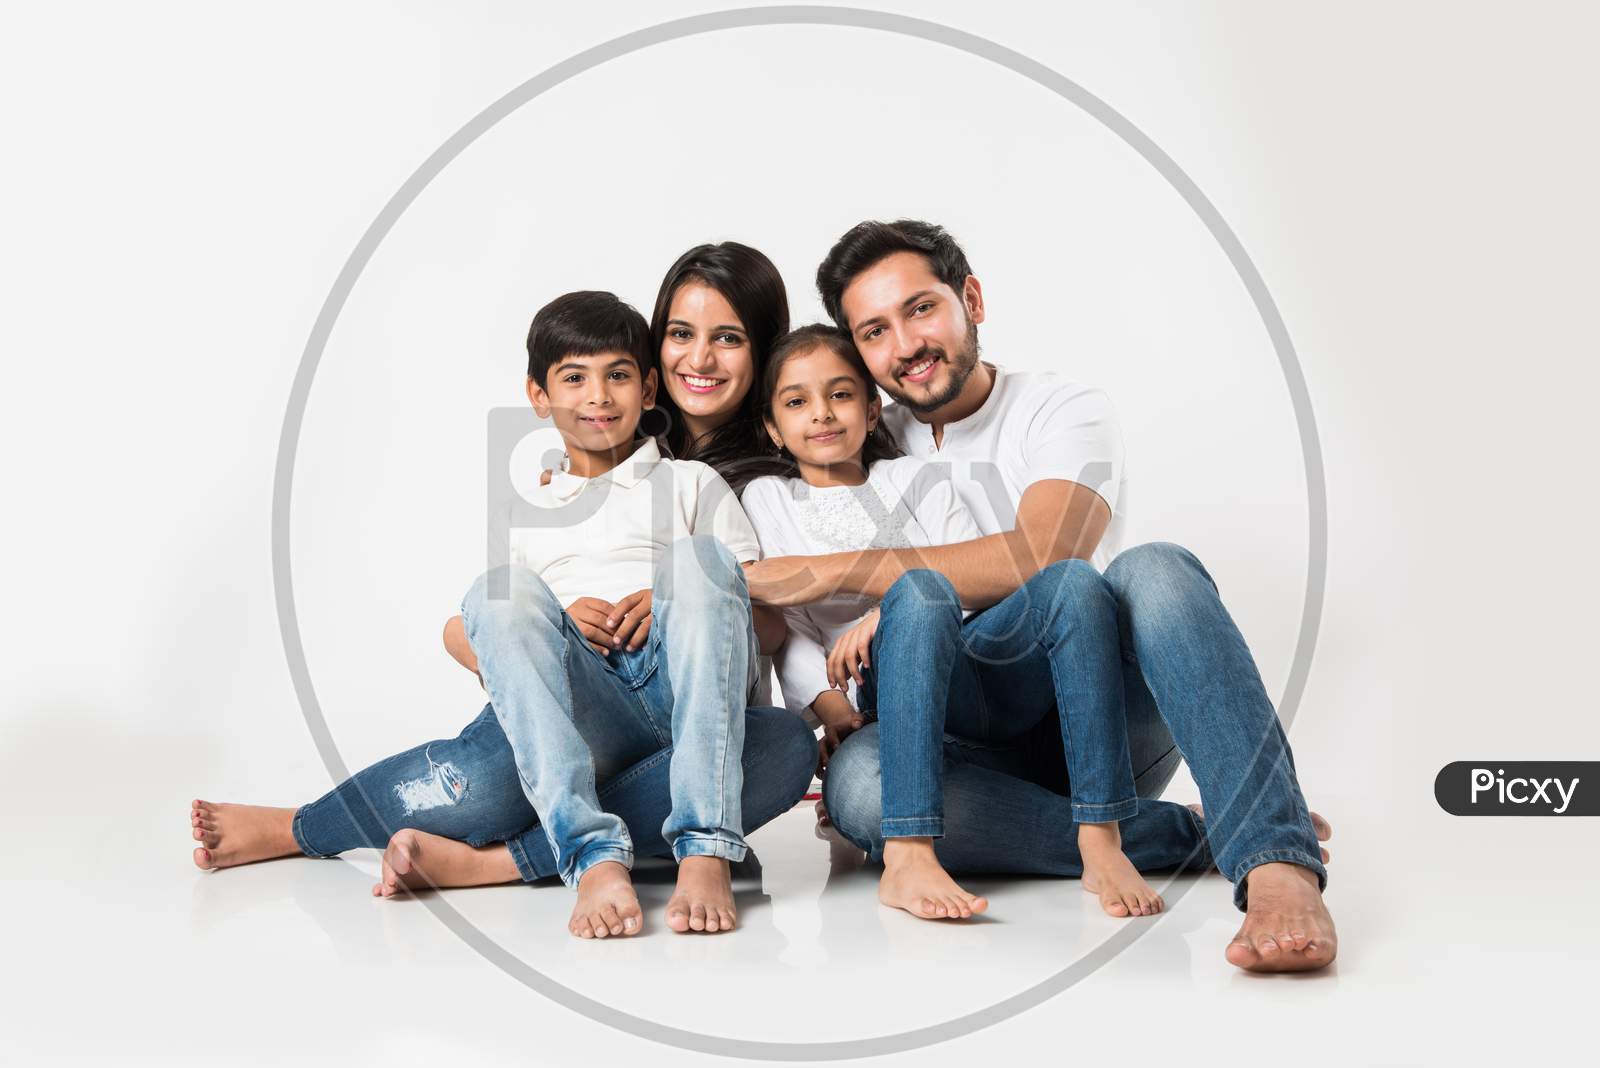 Young family sitting isolated over white